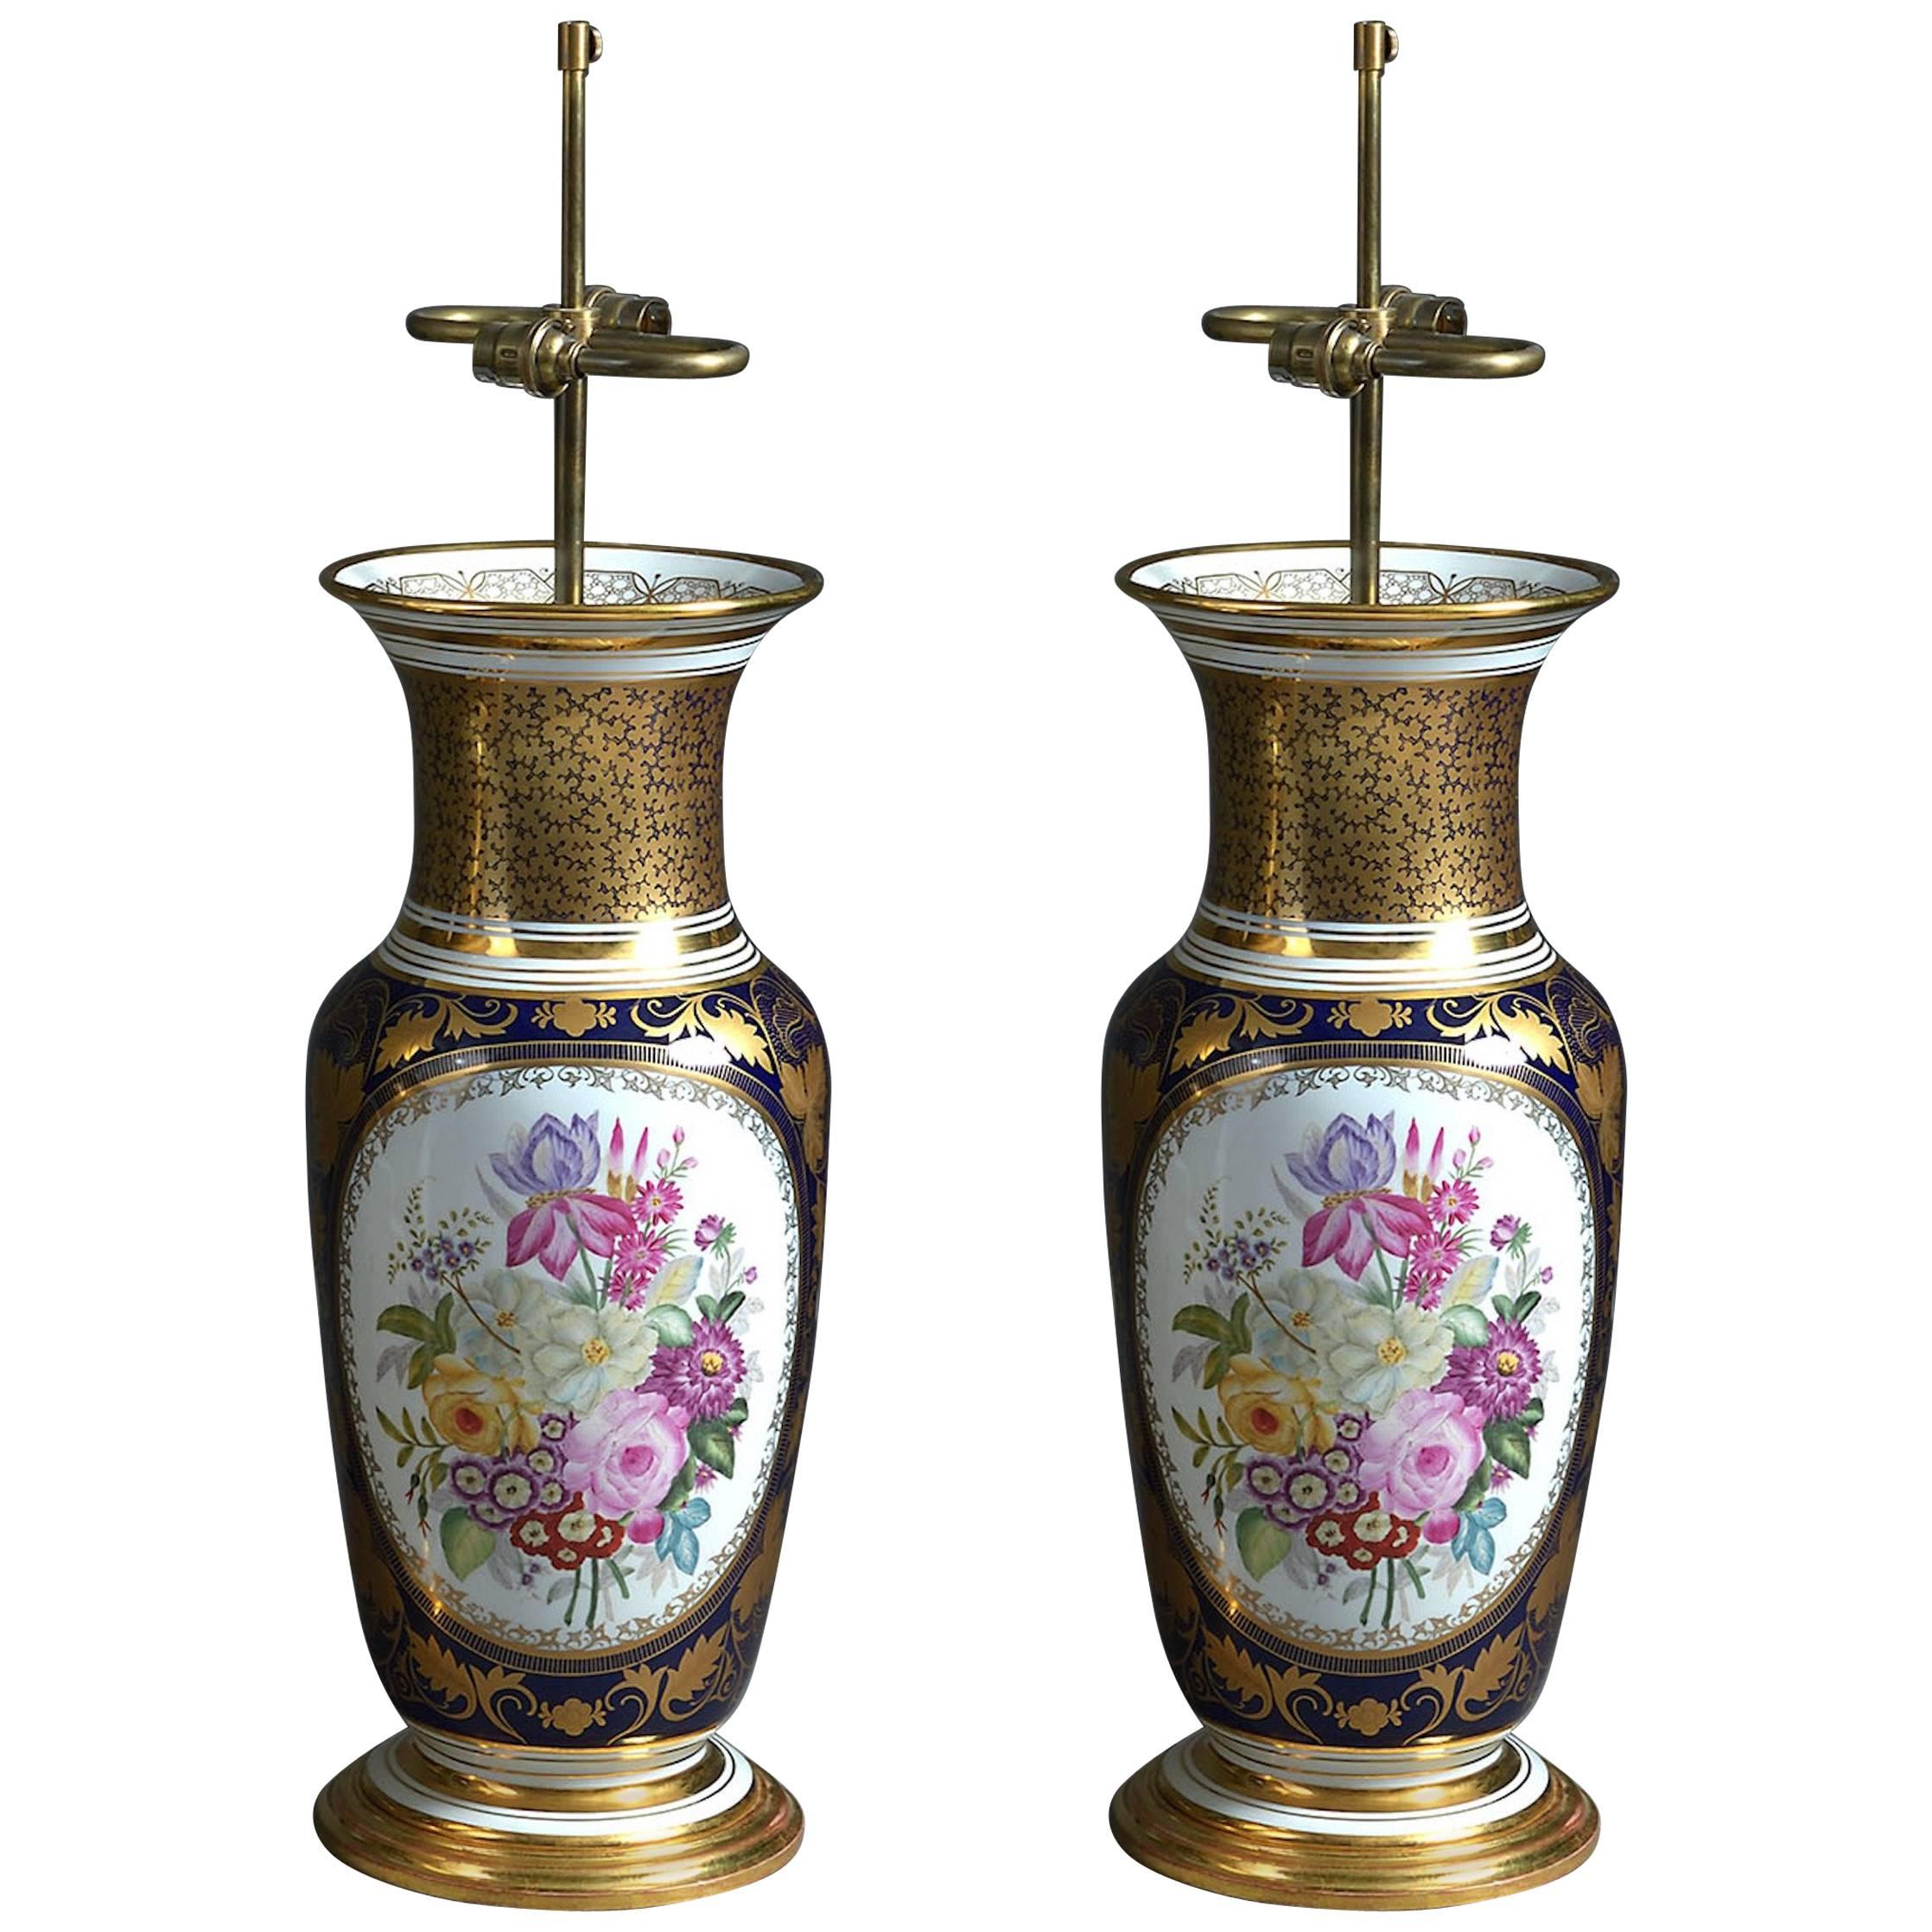 Pair of Large Paris Porcelain Vases with Floral Panels Mounted as Lamps